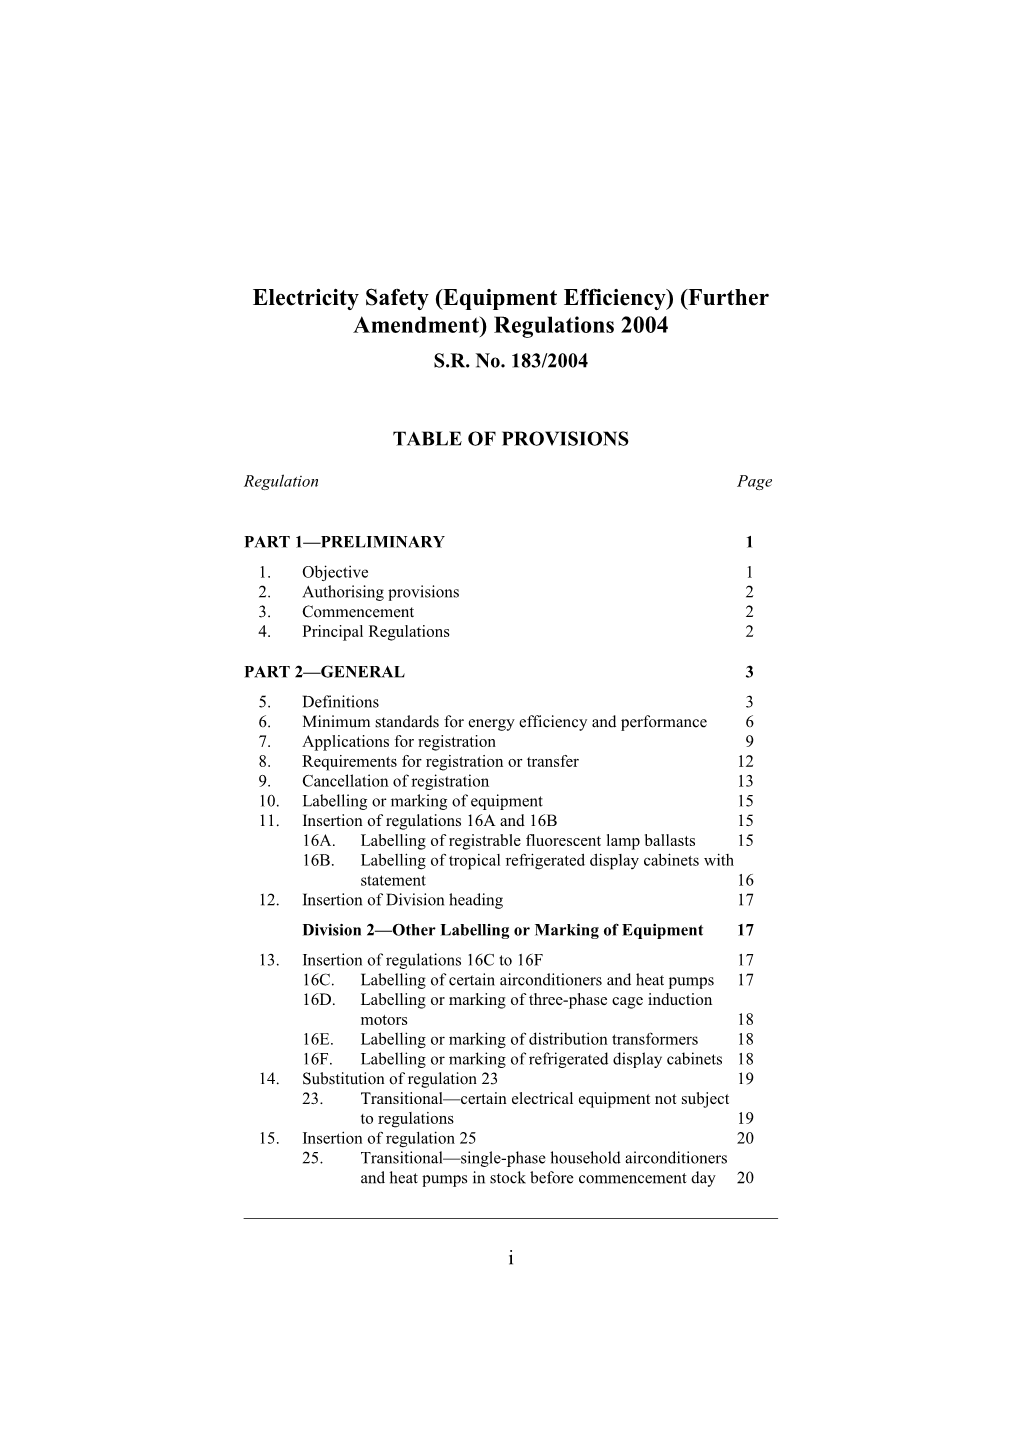 Electricity Safety (Equipment Efficiency) (Further Amendment) Regulations 2004